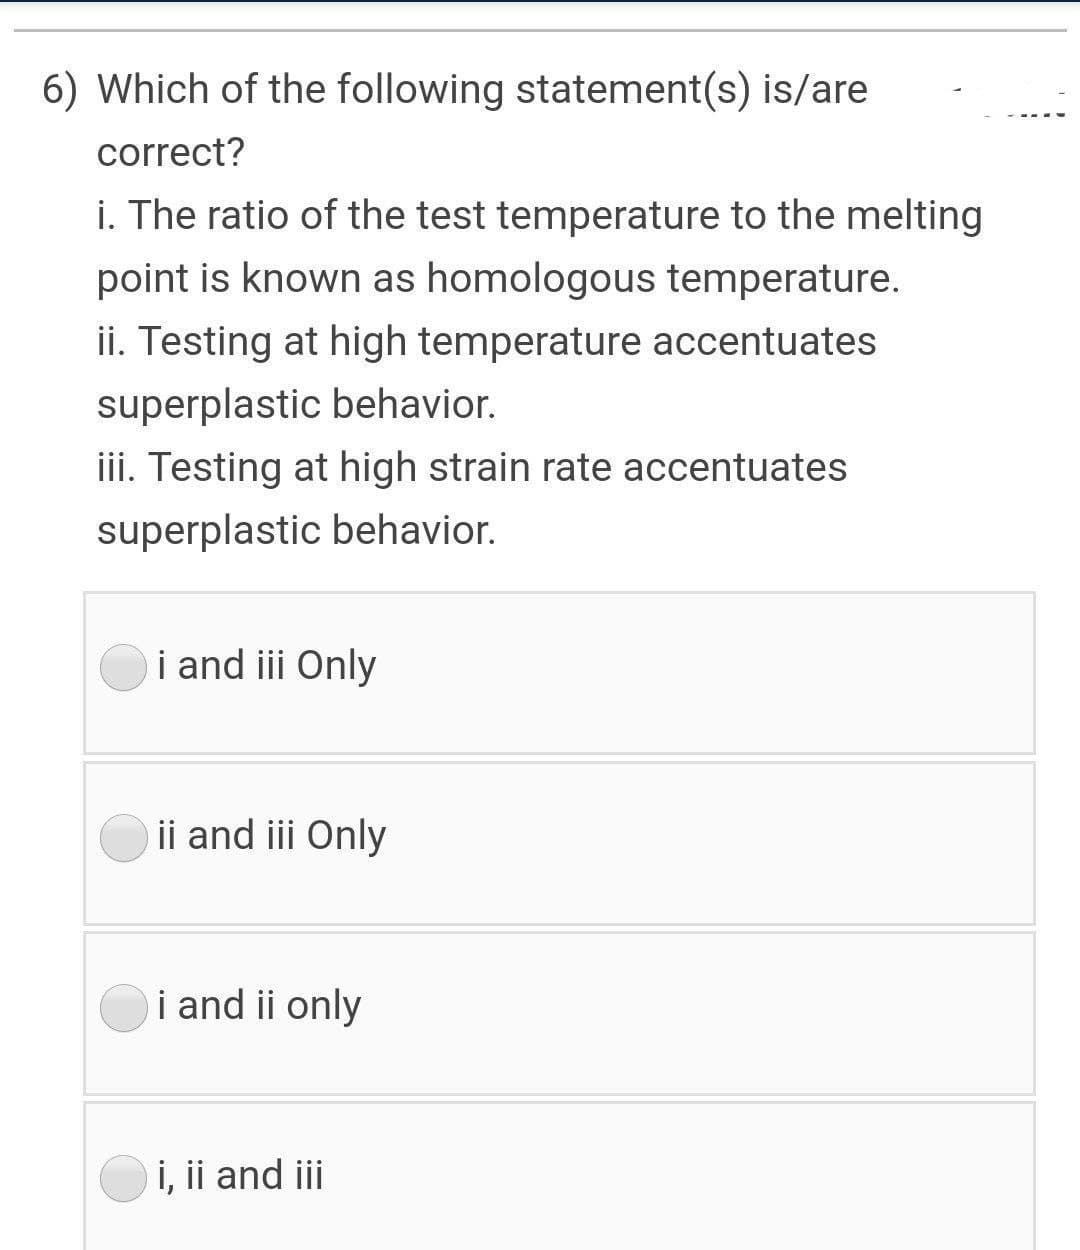 6) Which of the following statement(s) is/are
correct?
i. The ratio of the test temperature to the melting
point is known as homologous temperature.
ii. Testing at high temperature accentuates
superplastic behavior.
iii. Testing at high strain rate accentuates
superplastic behavior.
i and iii Only
ii and iii Only
i and ii only
i, ii and ii
